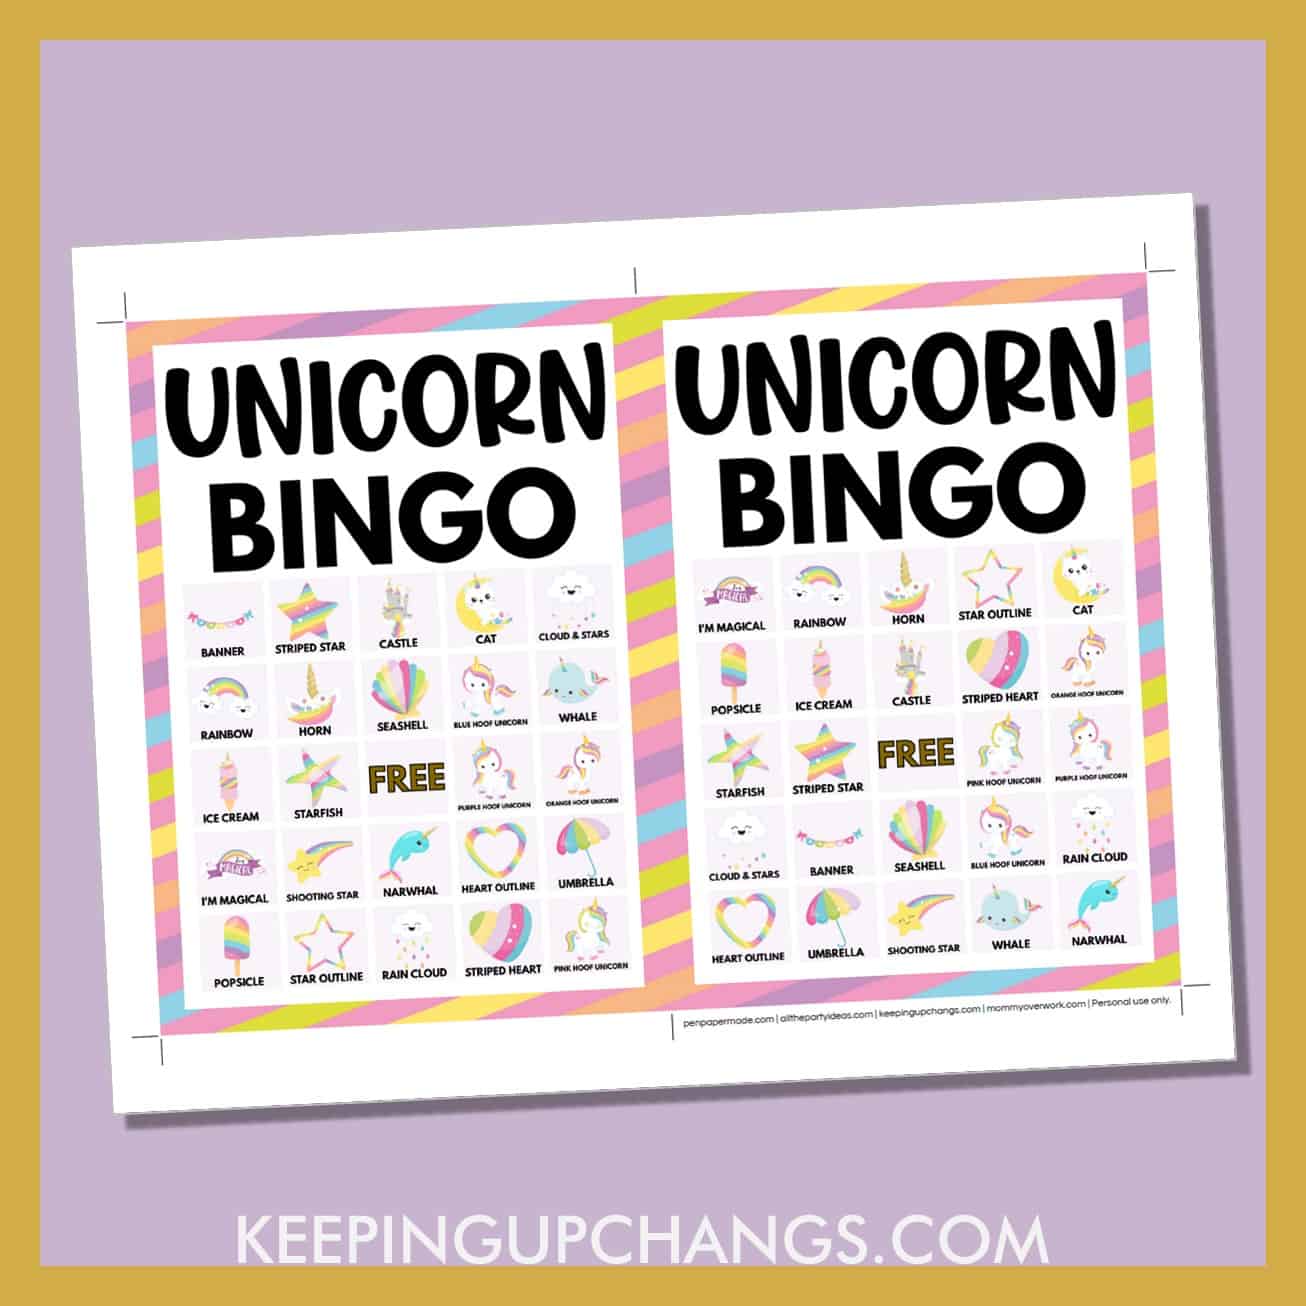 free unicorn bingo card 5x5 5x7 game boards with images and text words.